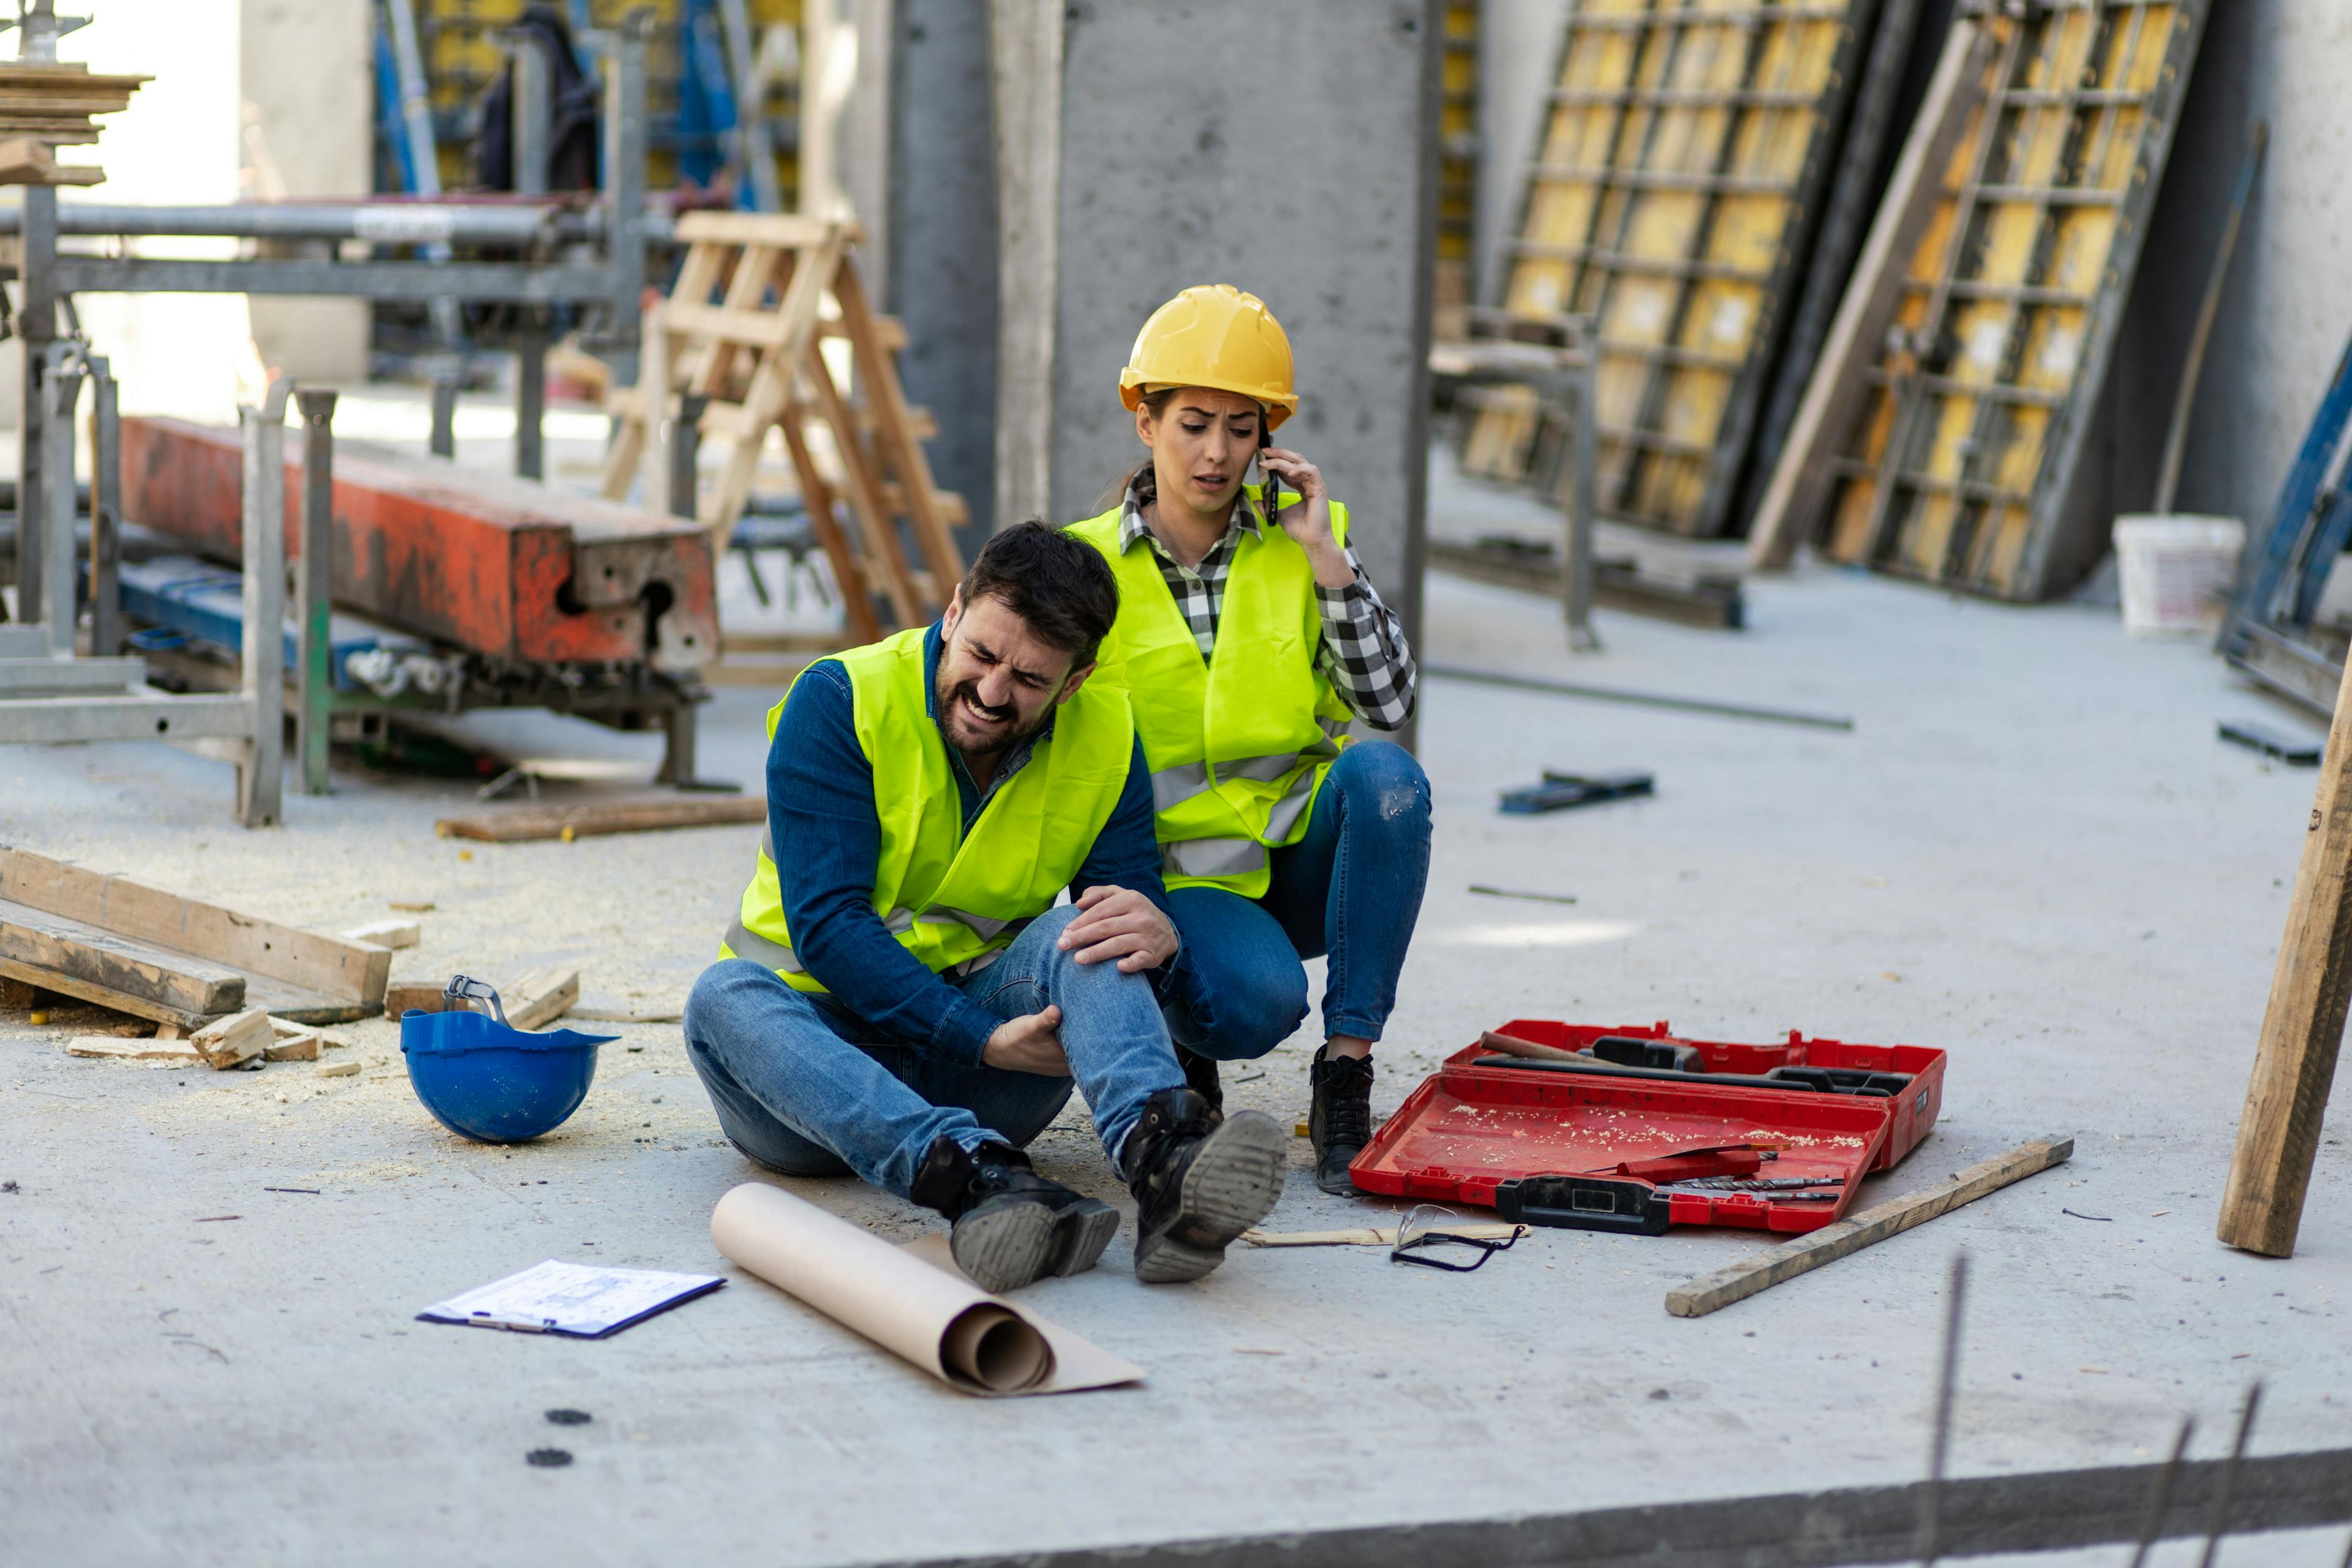 Related to Construction Site Accidents: Occupational Hazards and Workers' Rights